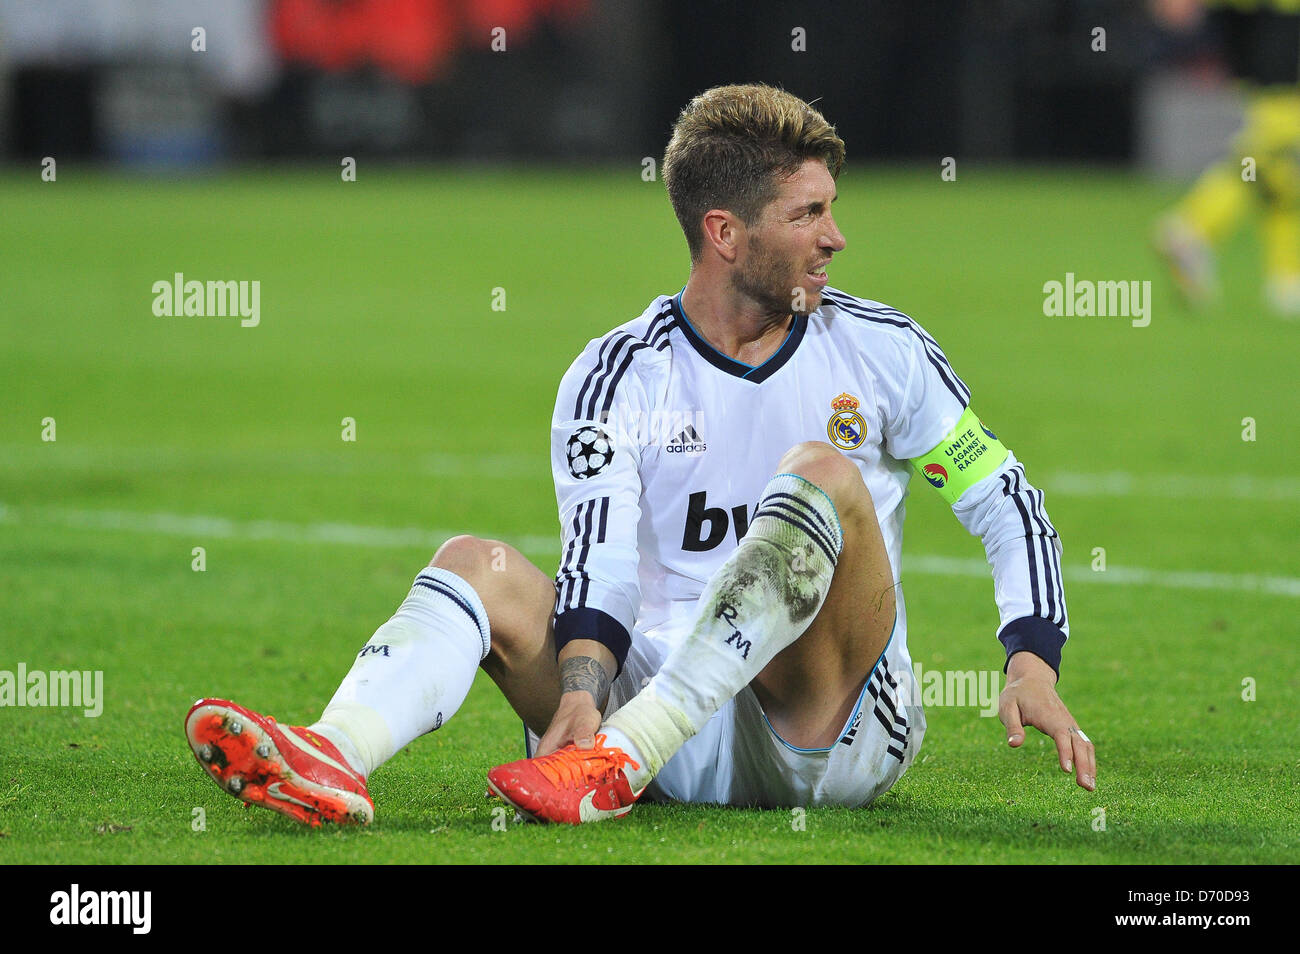 Dortmund Germany 24 April 13 Madrid S Sergio Ramos Sits On The Pitch During The Uefa Champions League Semi Final First Leg Soccer Match Between Borussia Dortmund And Real Madrid At Bvb Stadium Dortmund